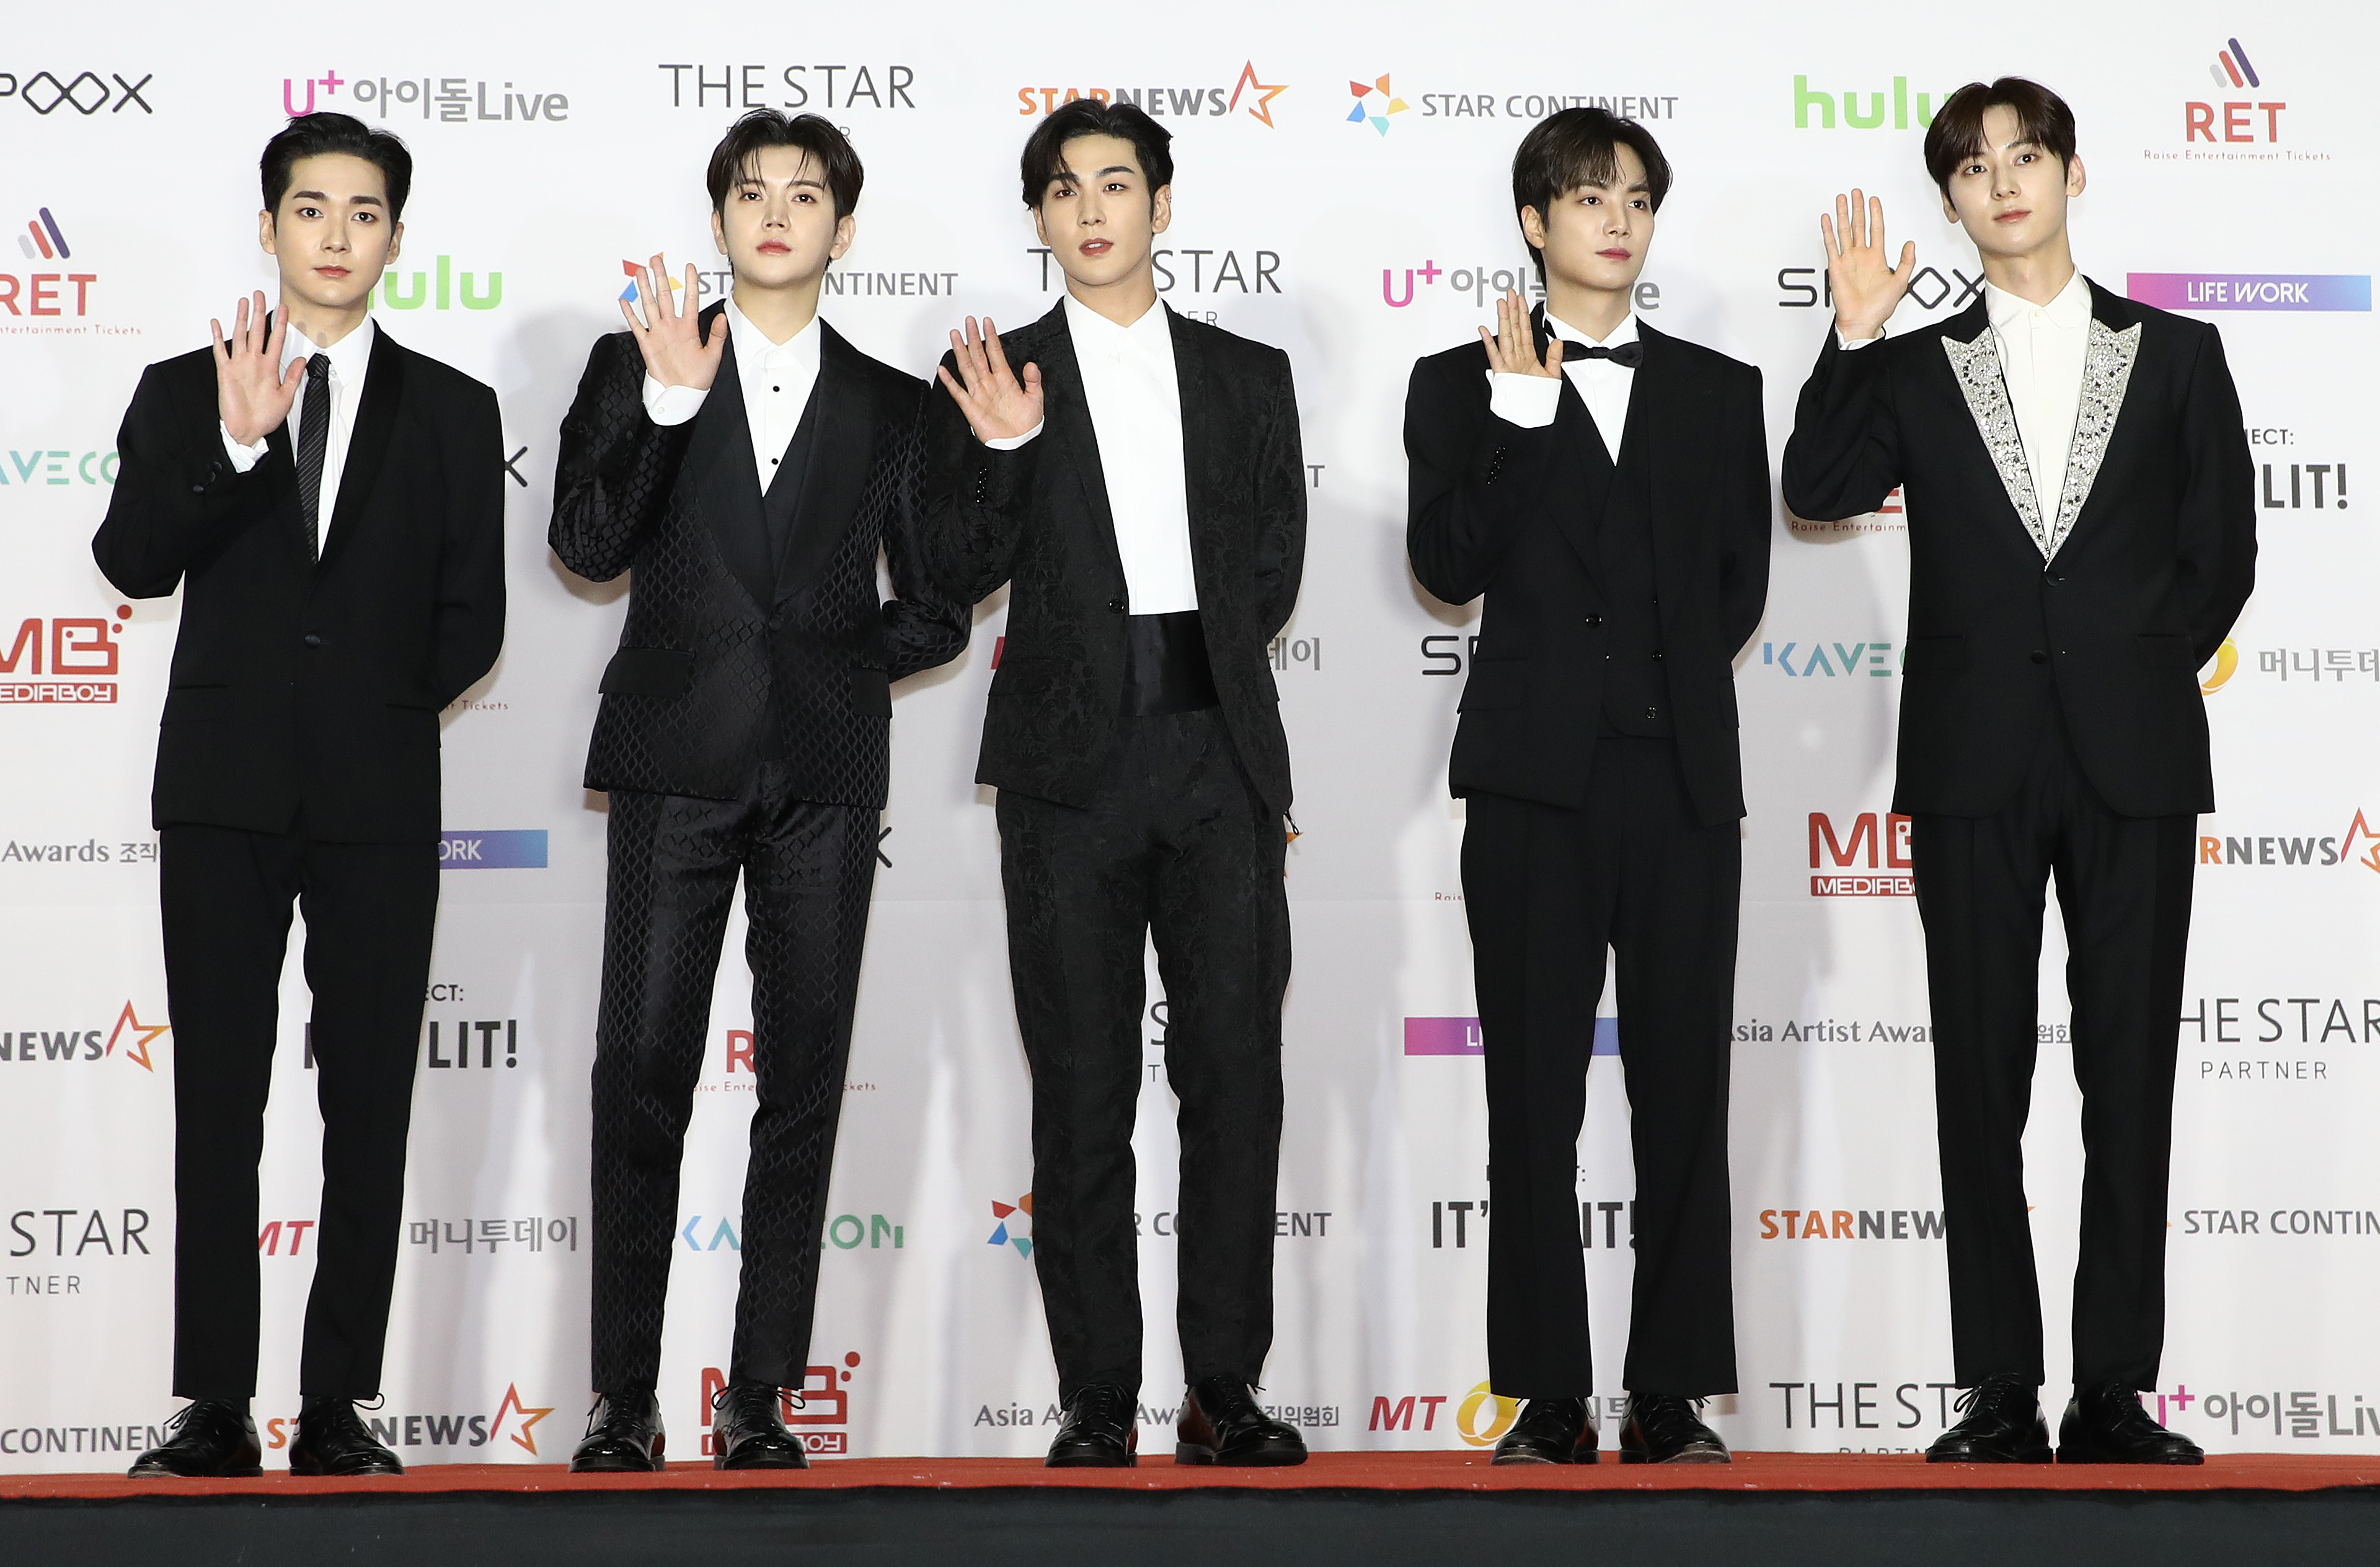 NU'EST attend the Asia Artists Awards in 2021